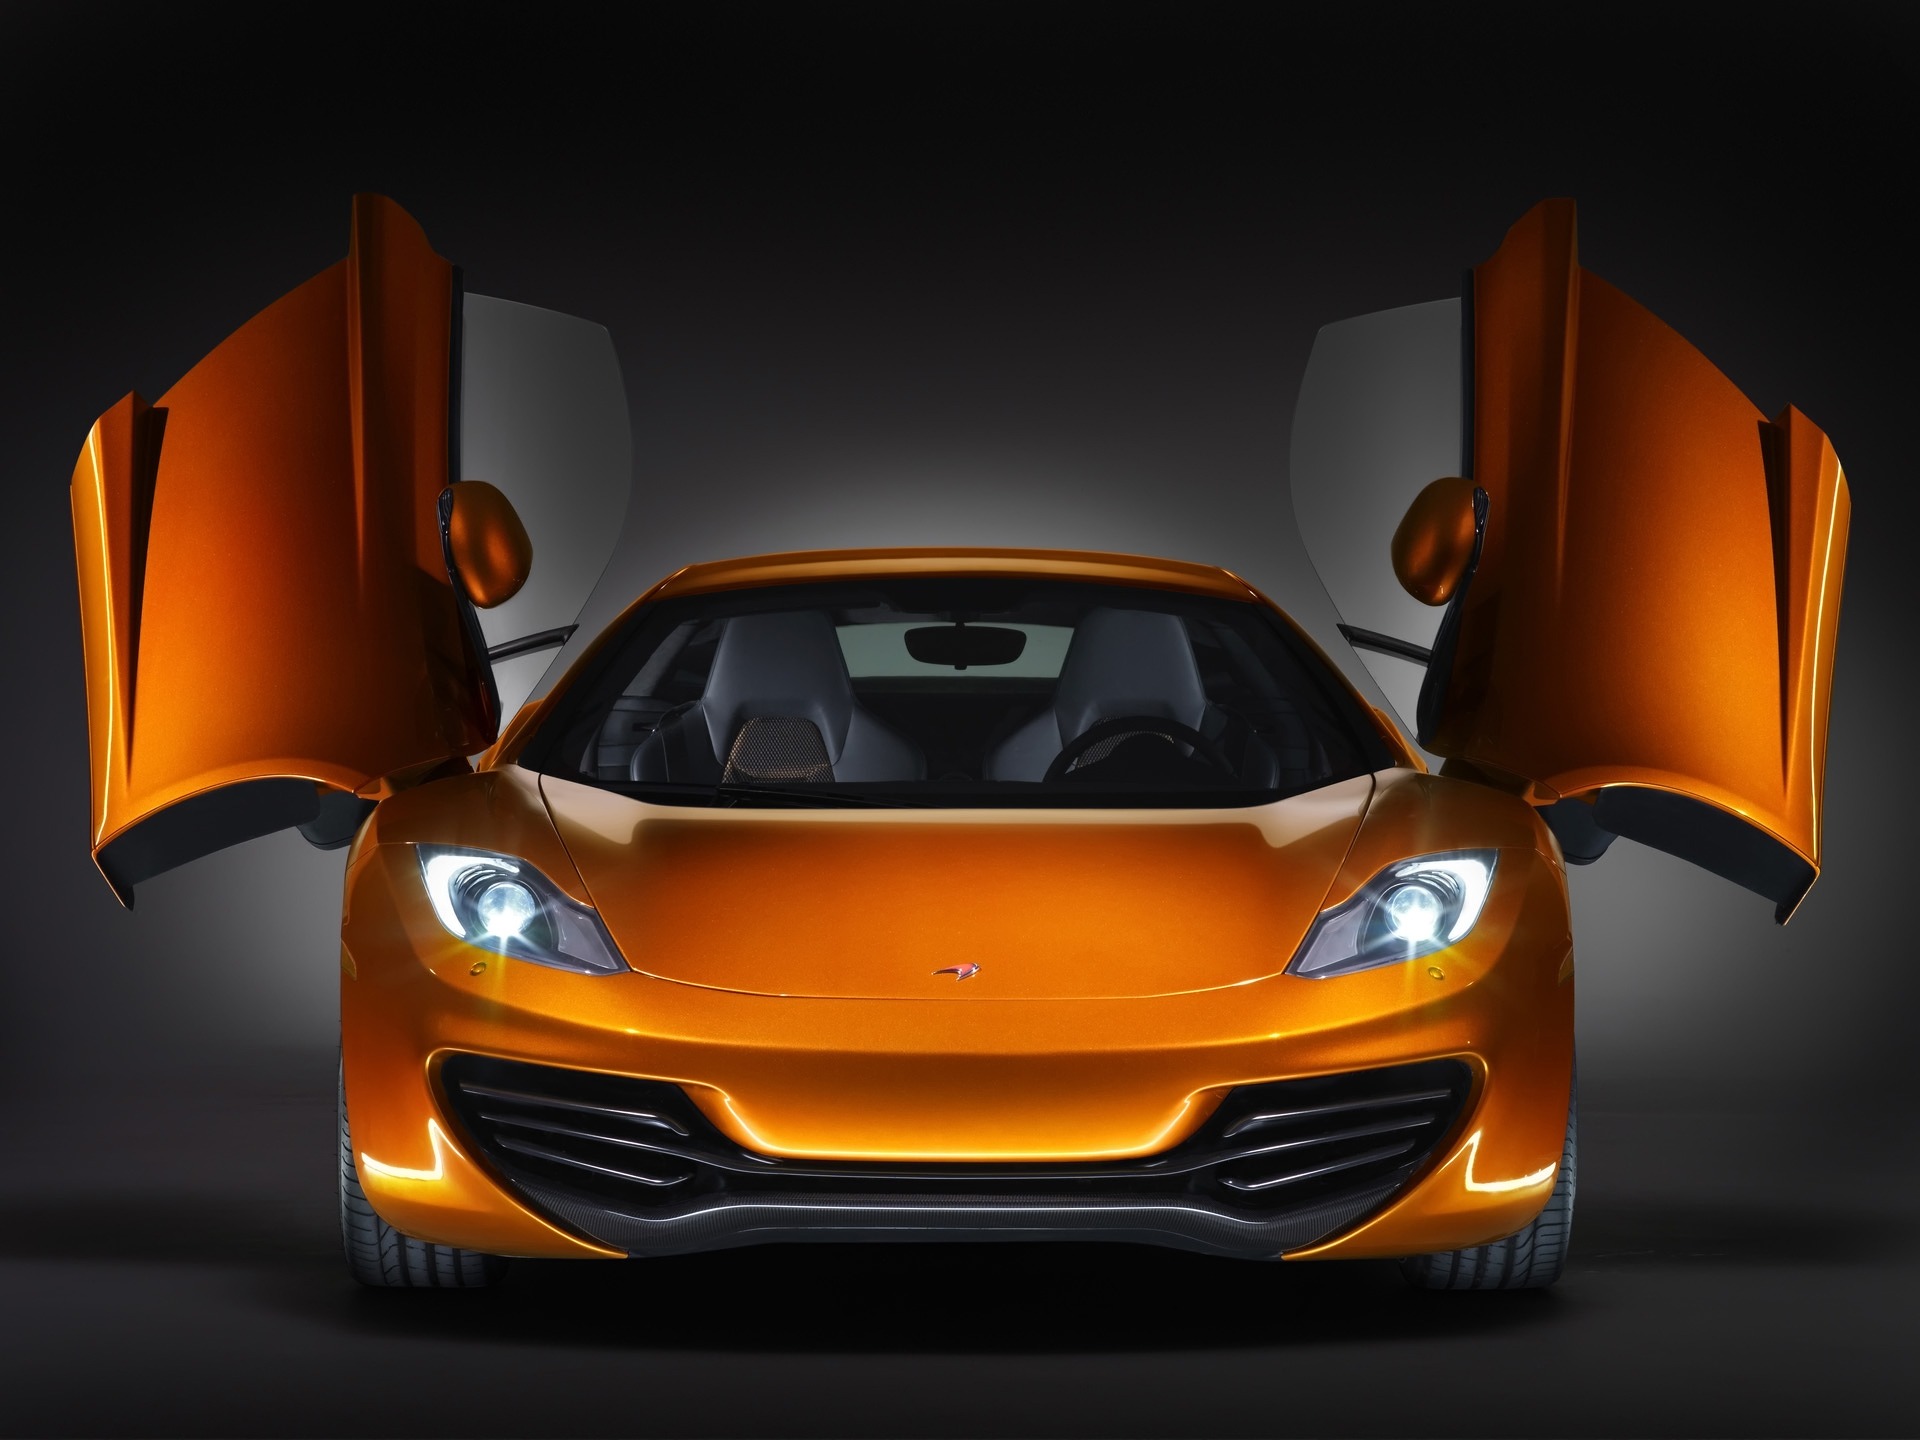 Download 21 wallpapers-for-macbook-air 2012-Mansory-Mclaren-Mp4-12c-Wallpaper-Awesome-Wallpapers-.jpg